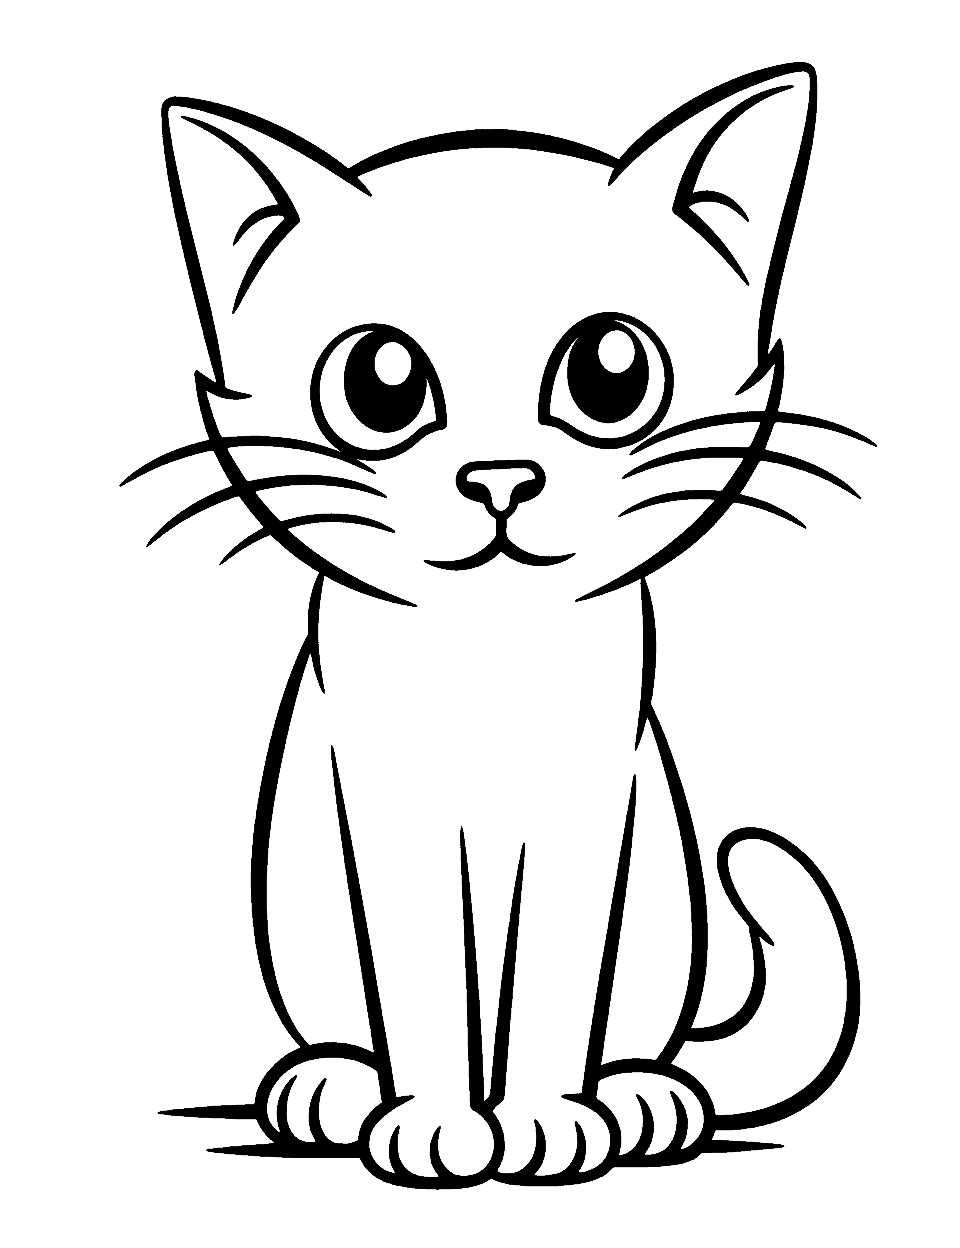 Easy Coloring Page of a Cat Silhouette - A simple silhouette of a cat, great for young children or those new to coloring.